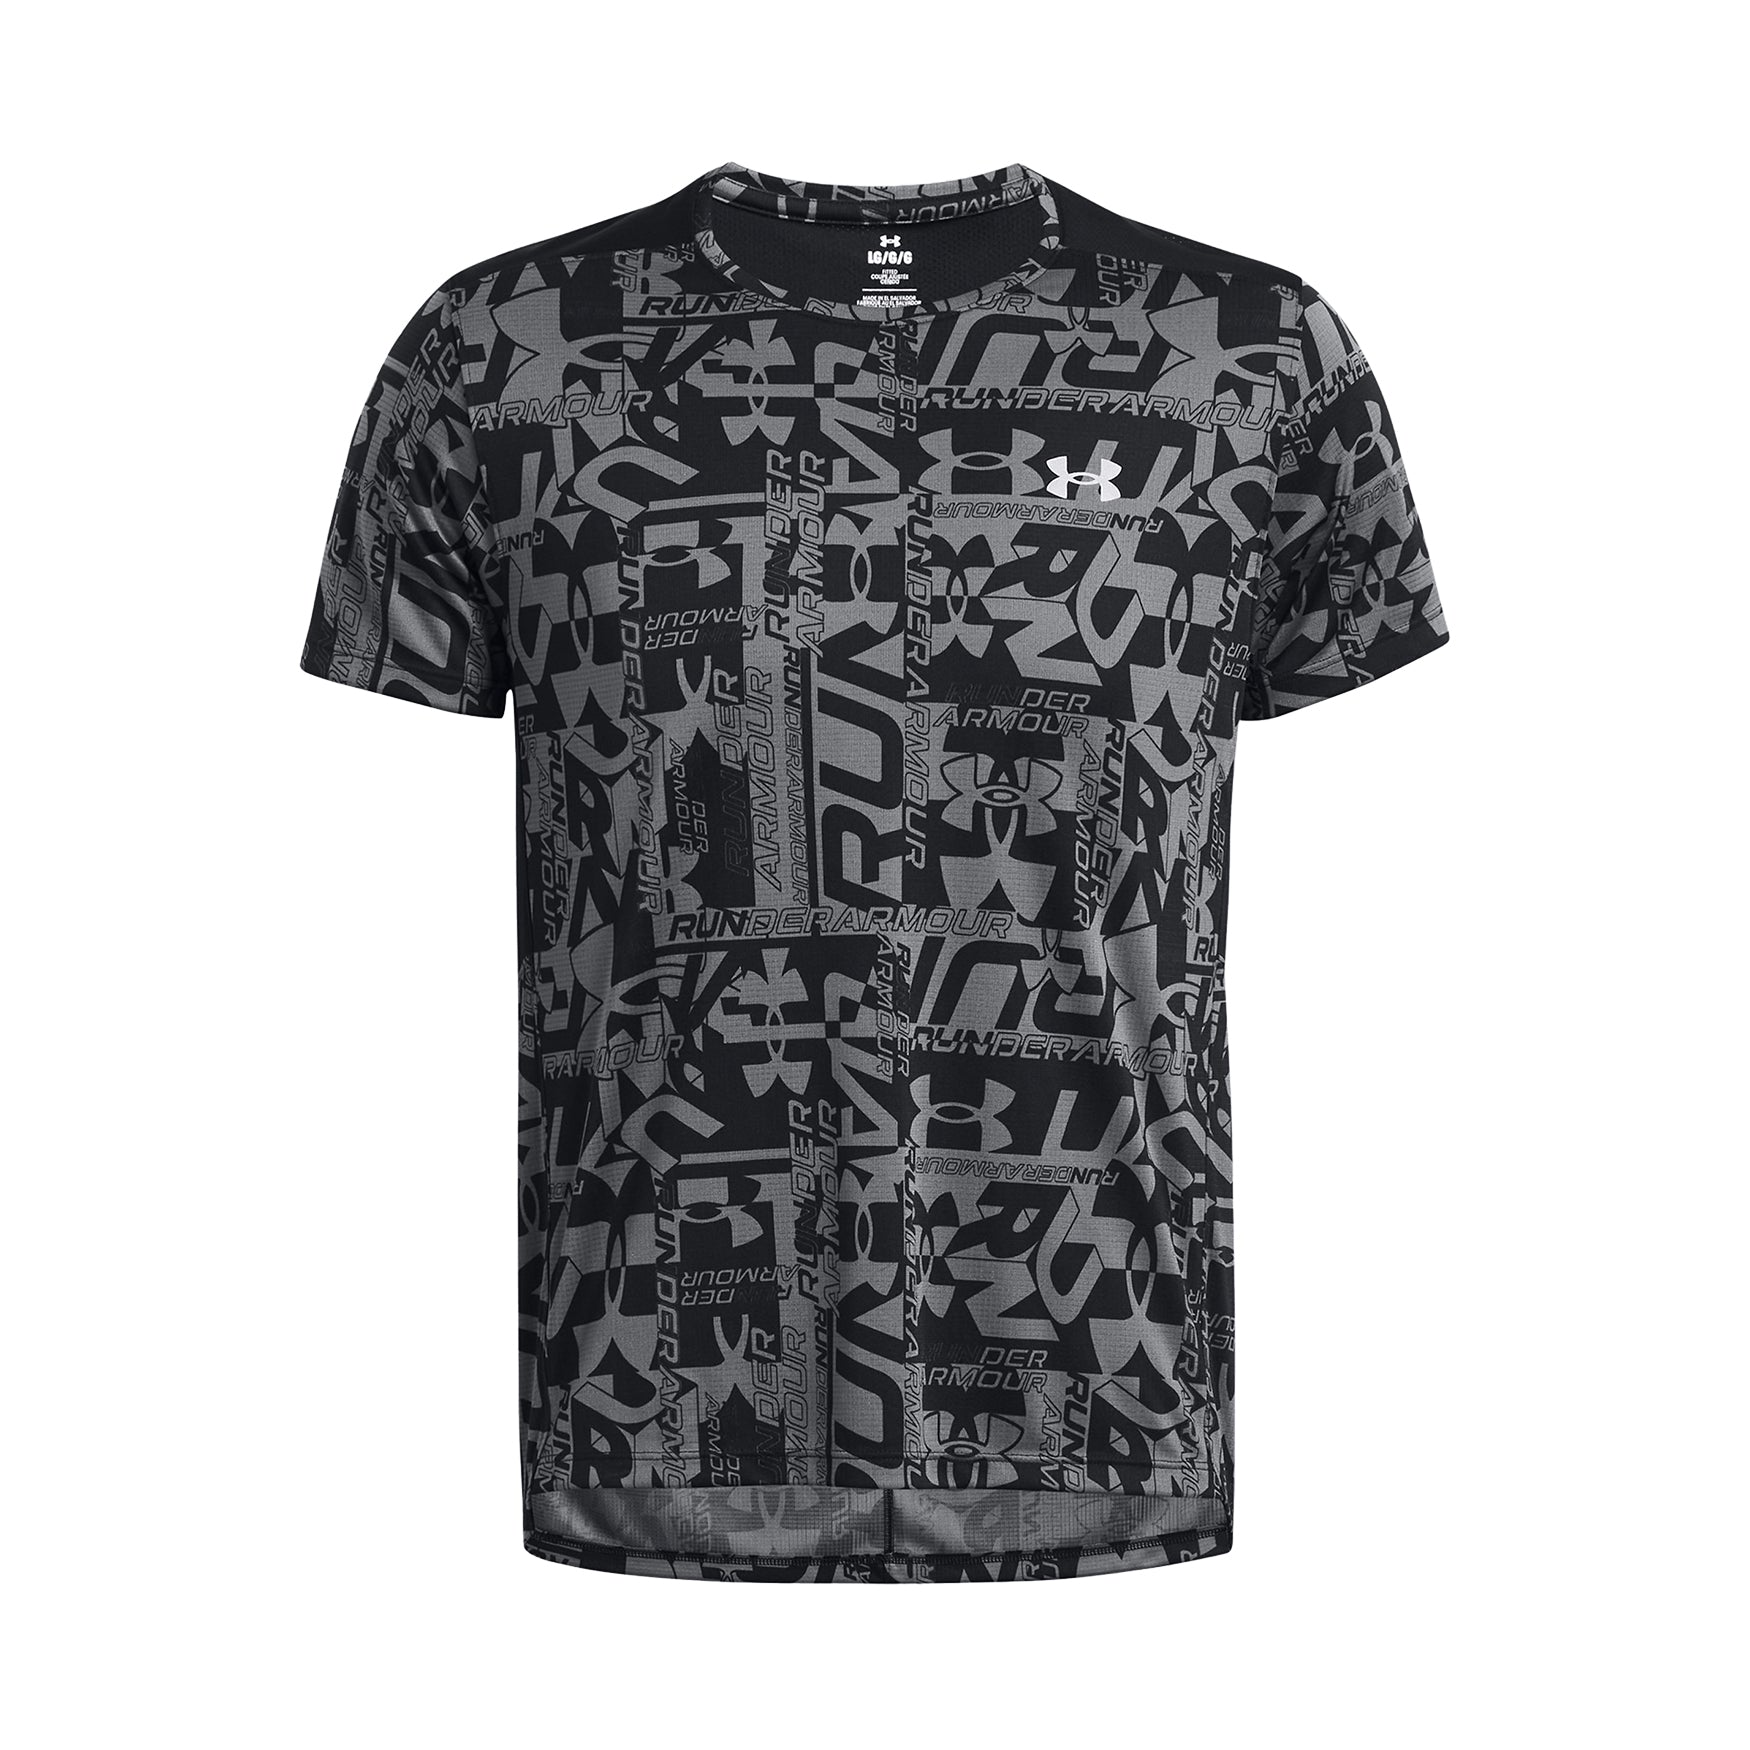 Under Armour Launch Printed Tee (Black)